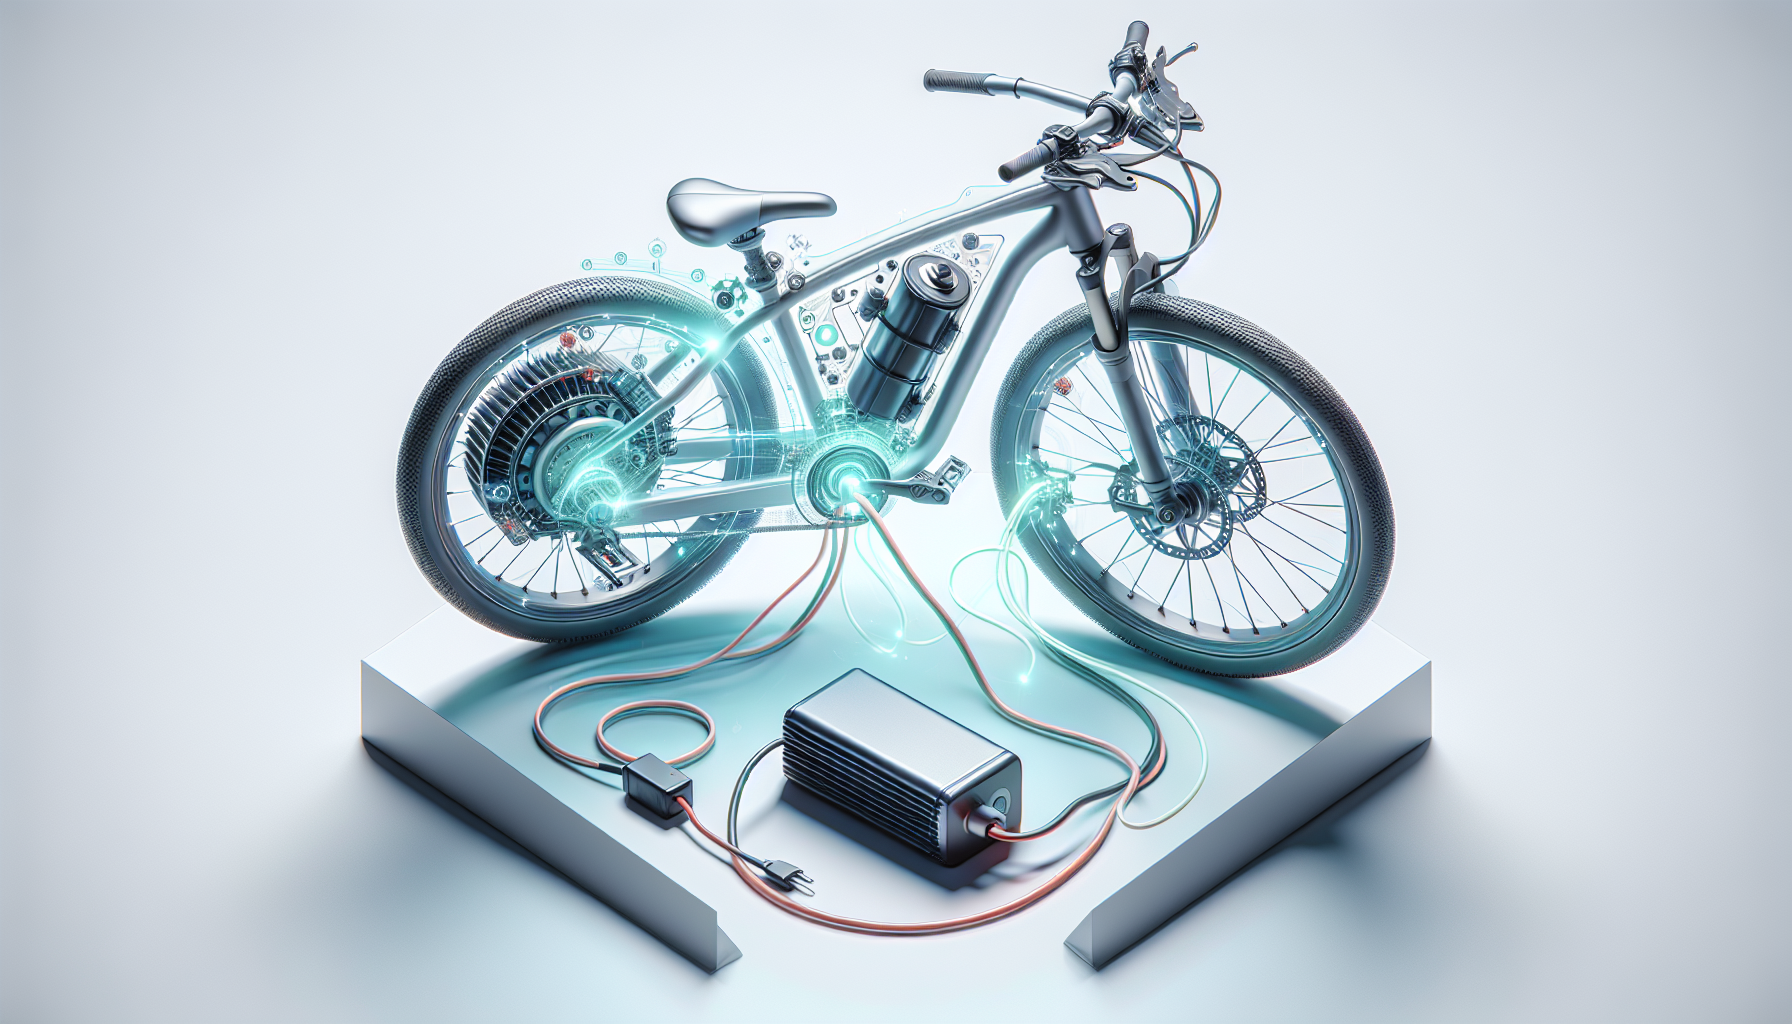 An illustration showing the anatomy of an electric bike